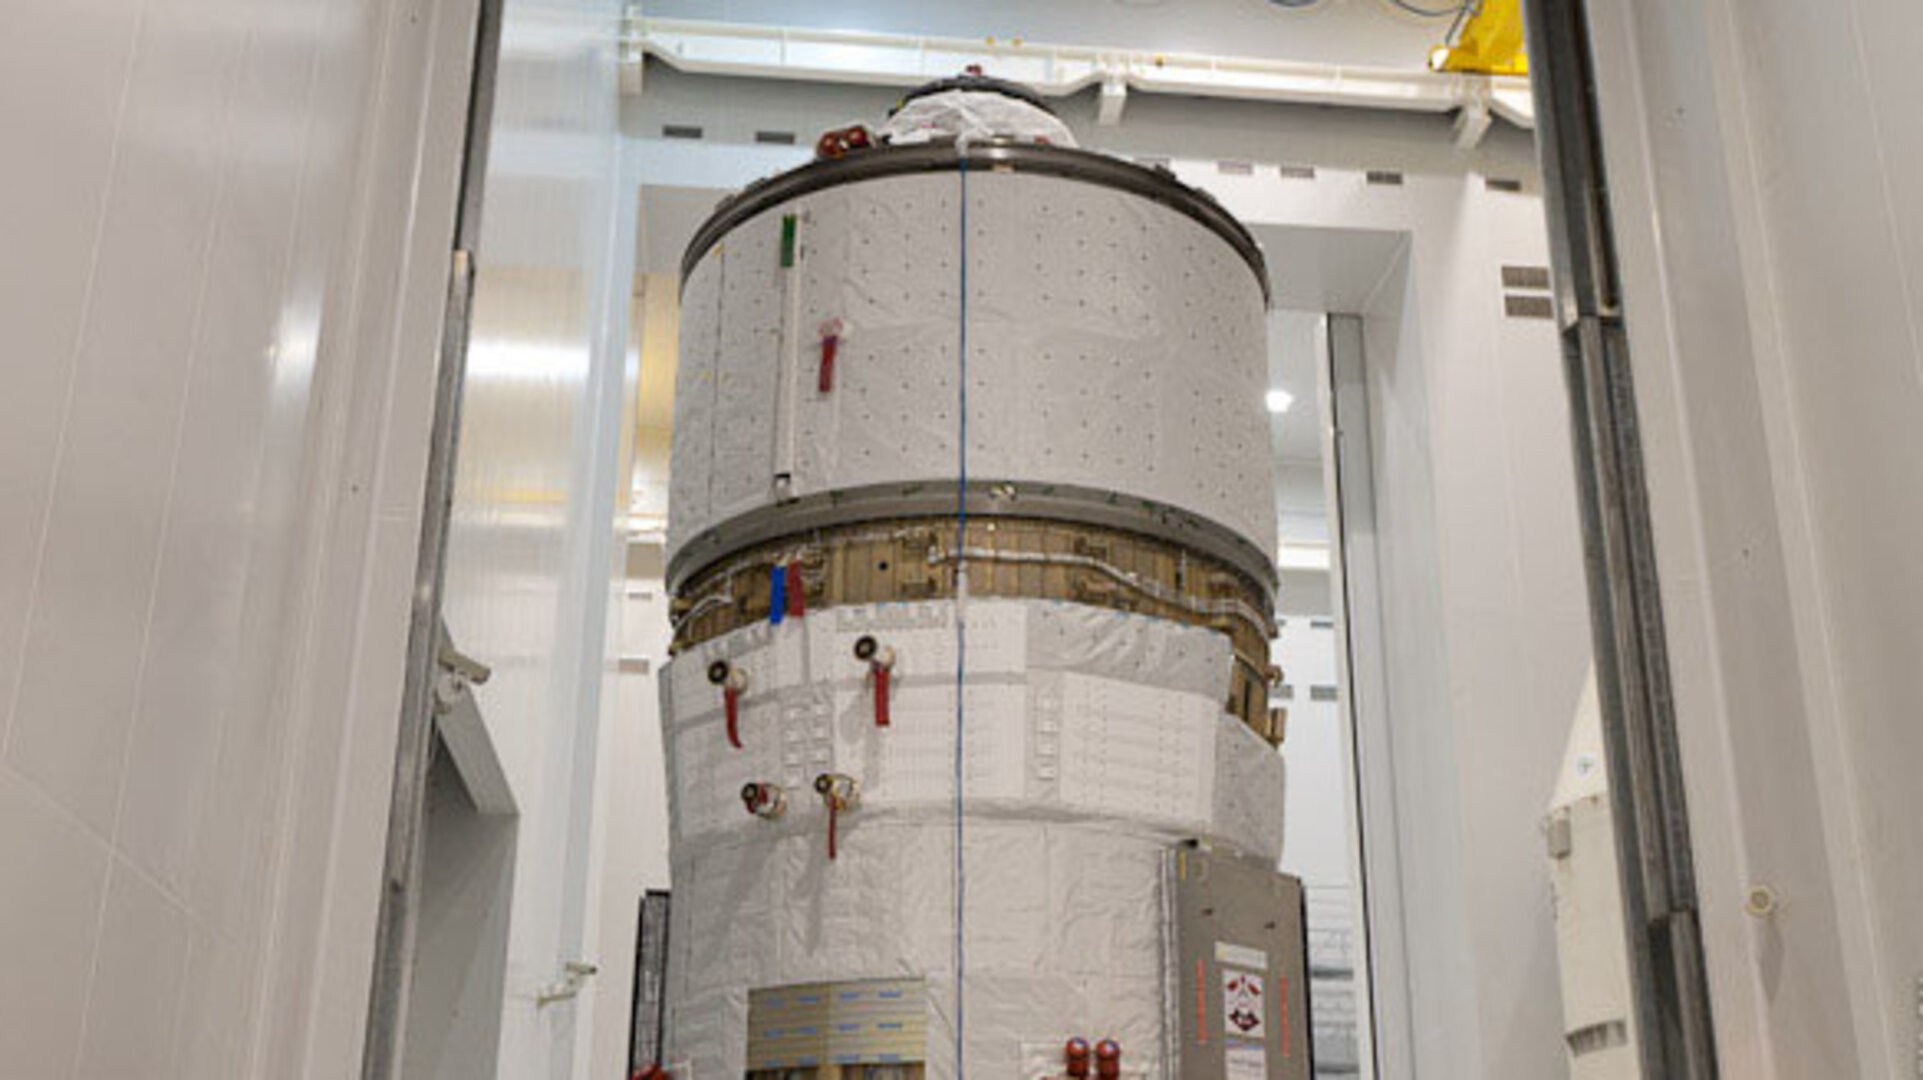 ATV-4 moved for fuelling